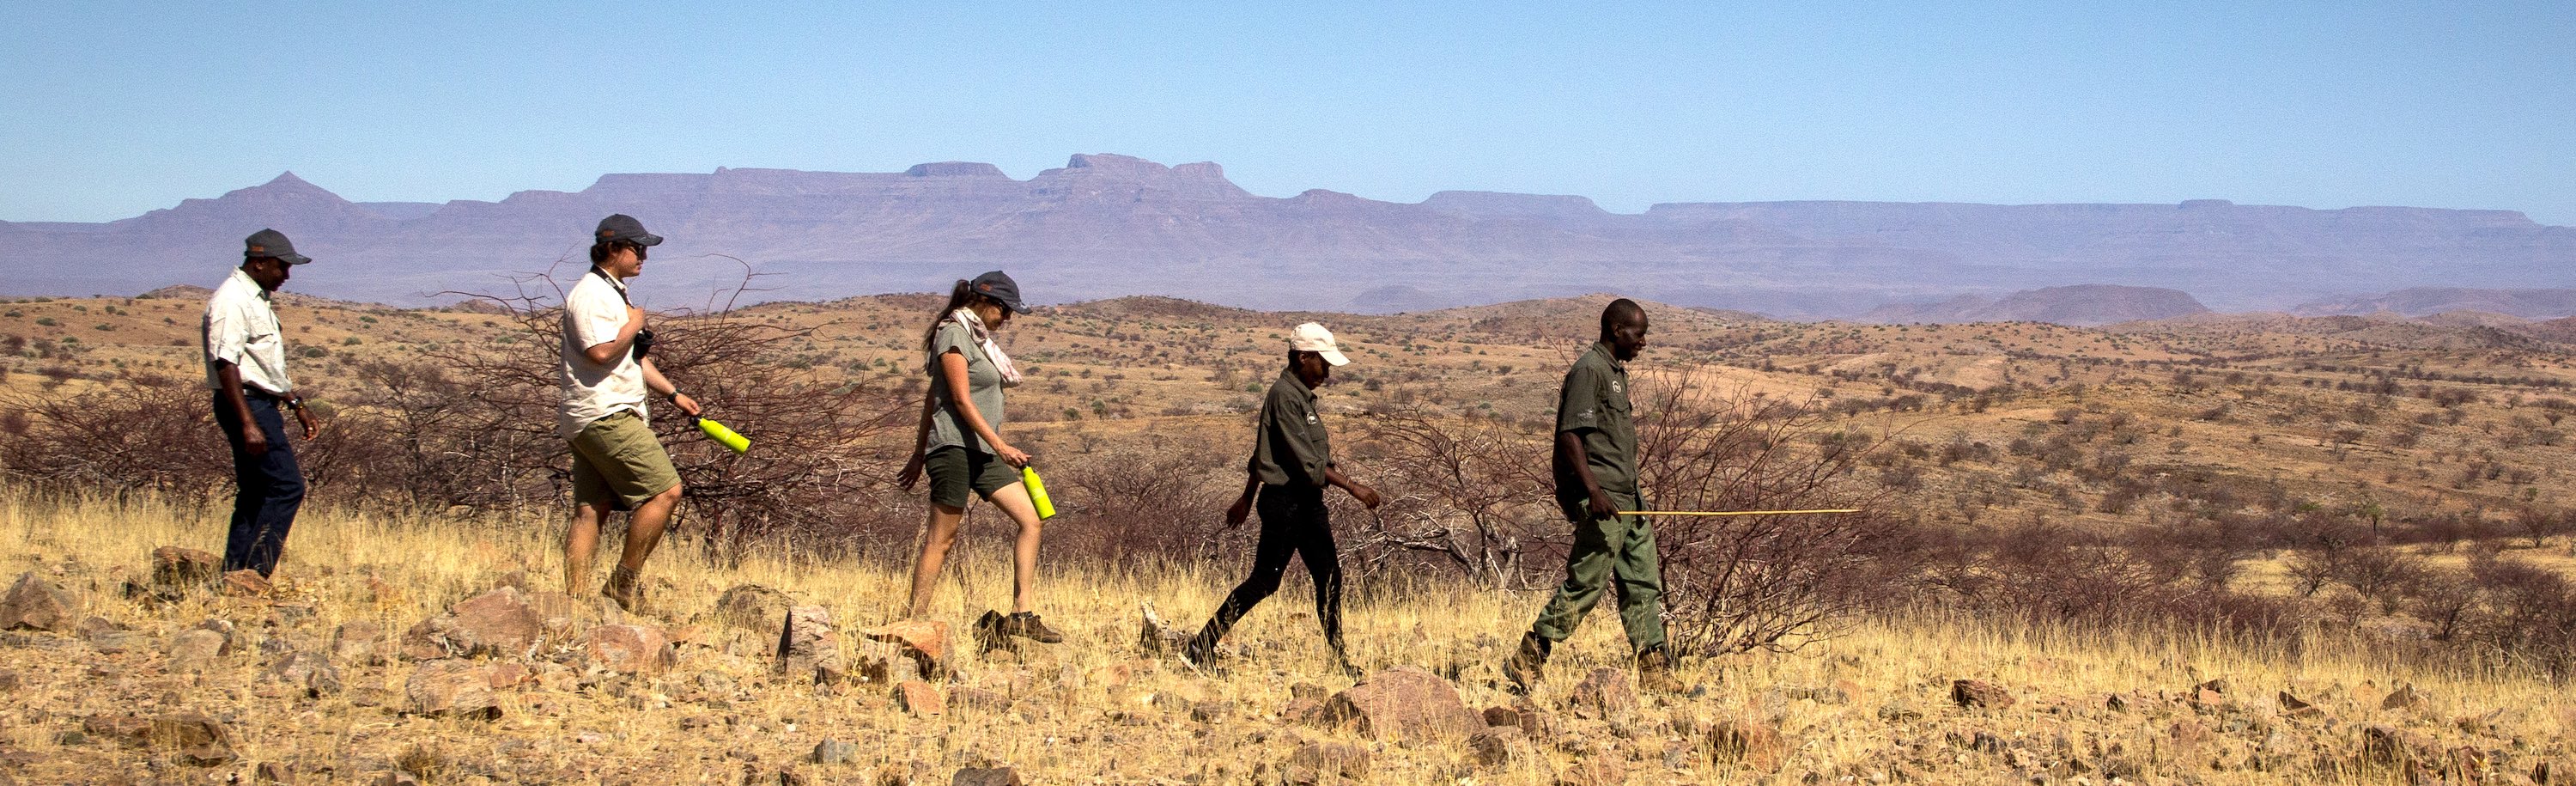 Tourists escorted by guides on a walking safari through //Huab Conservancy.